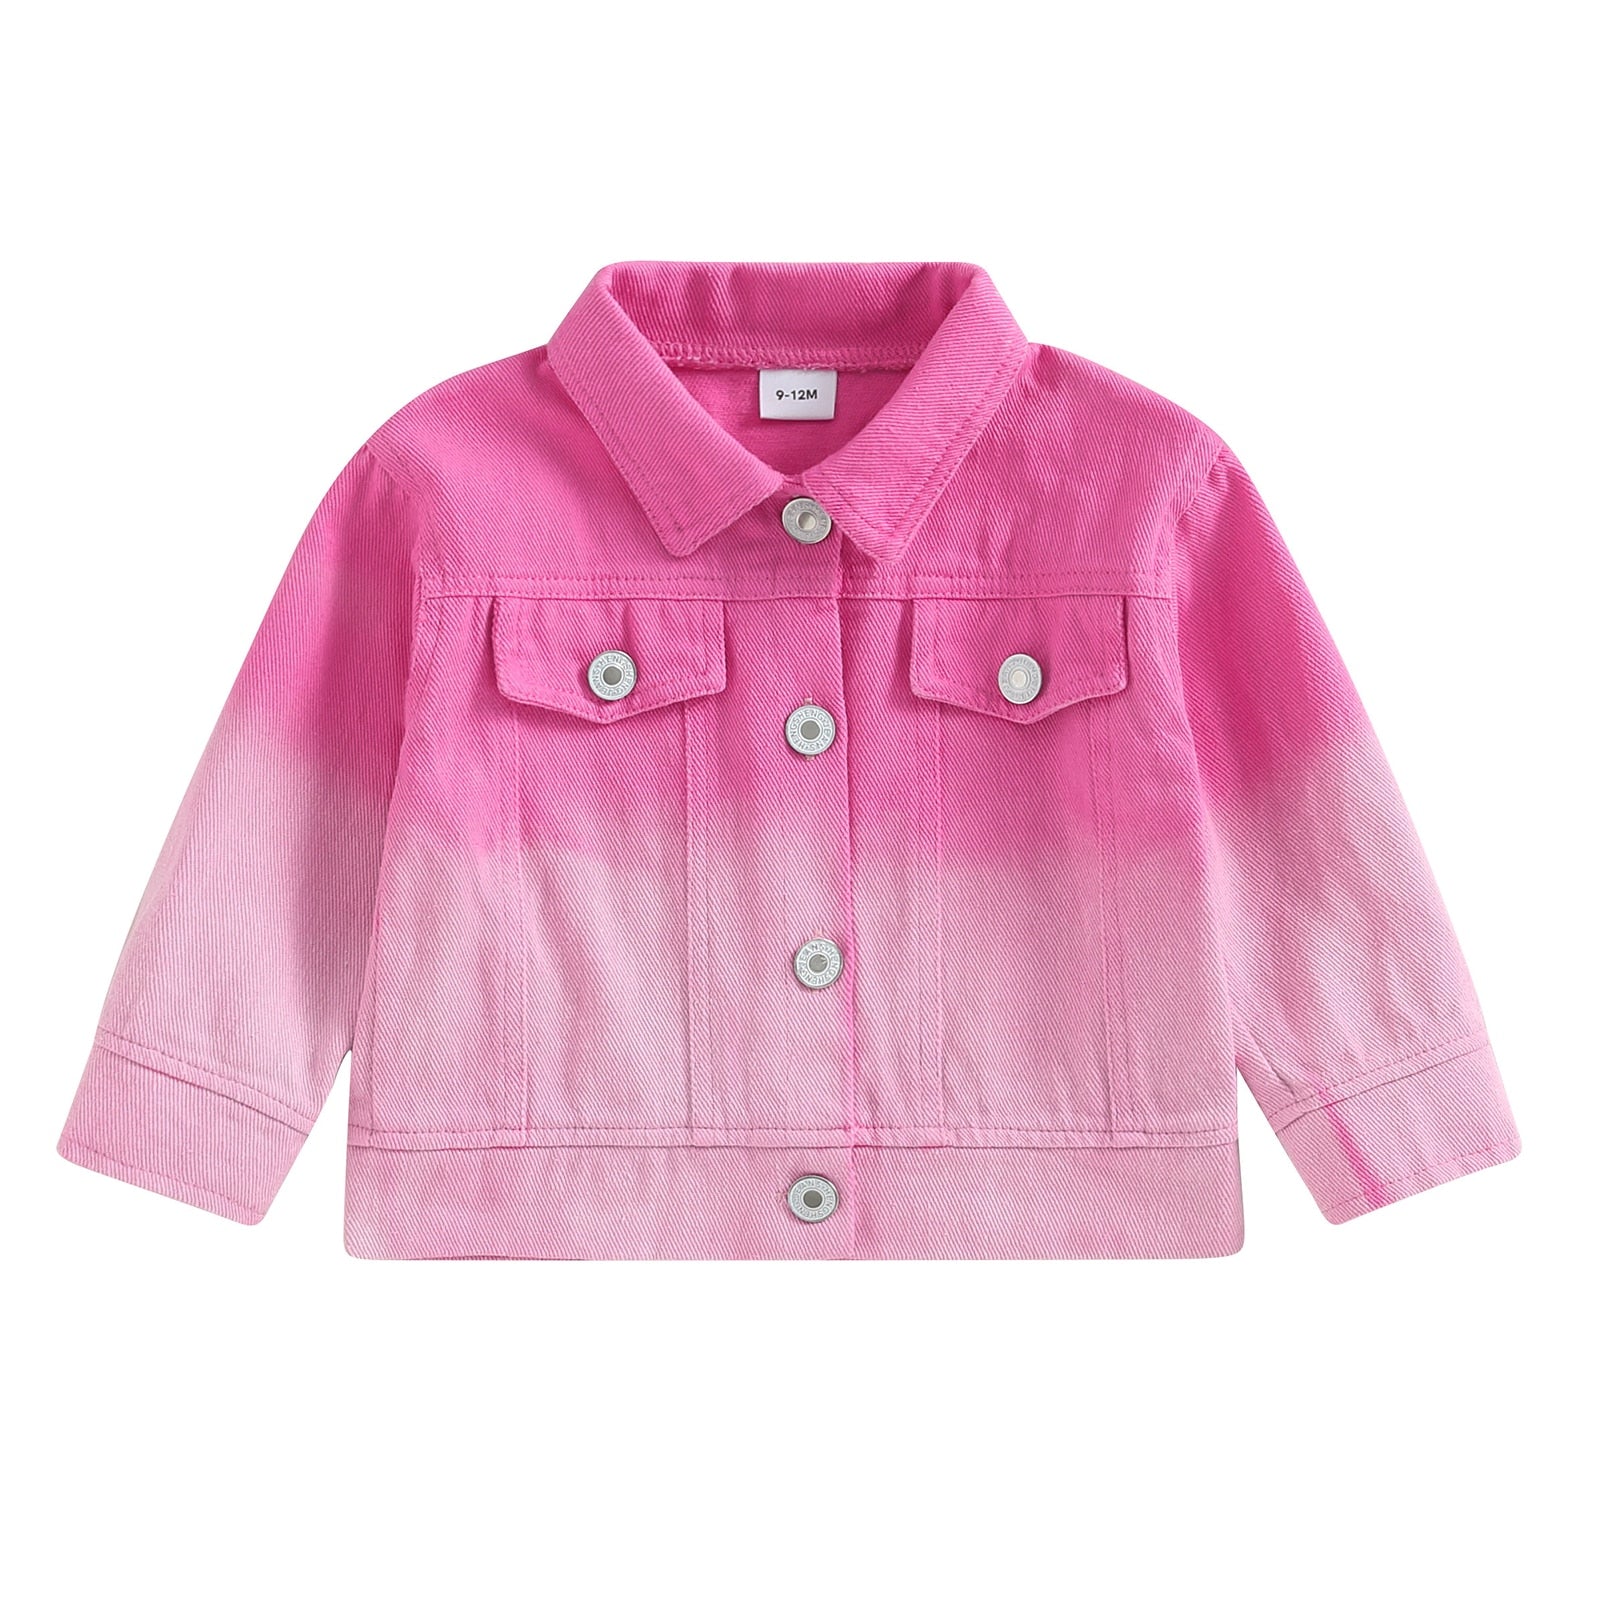 Girl and Boy Toddler Jean Jacket